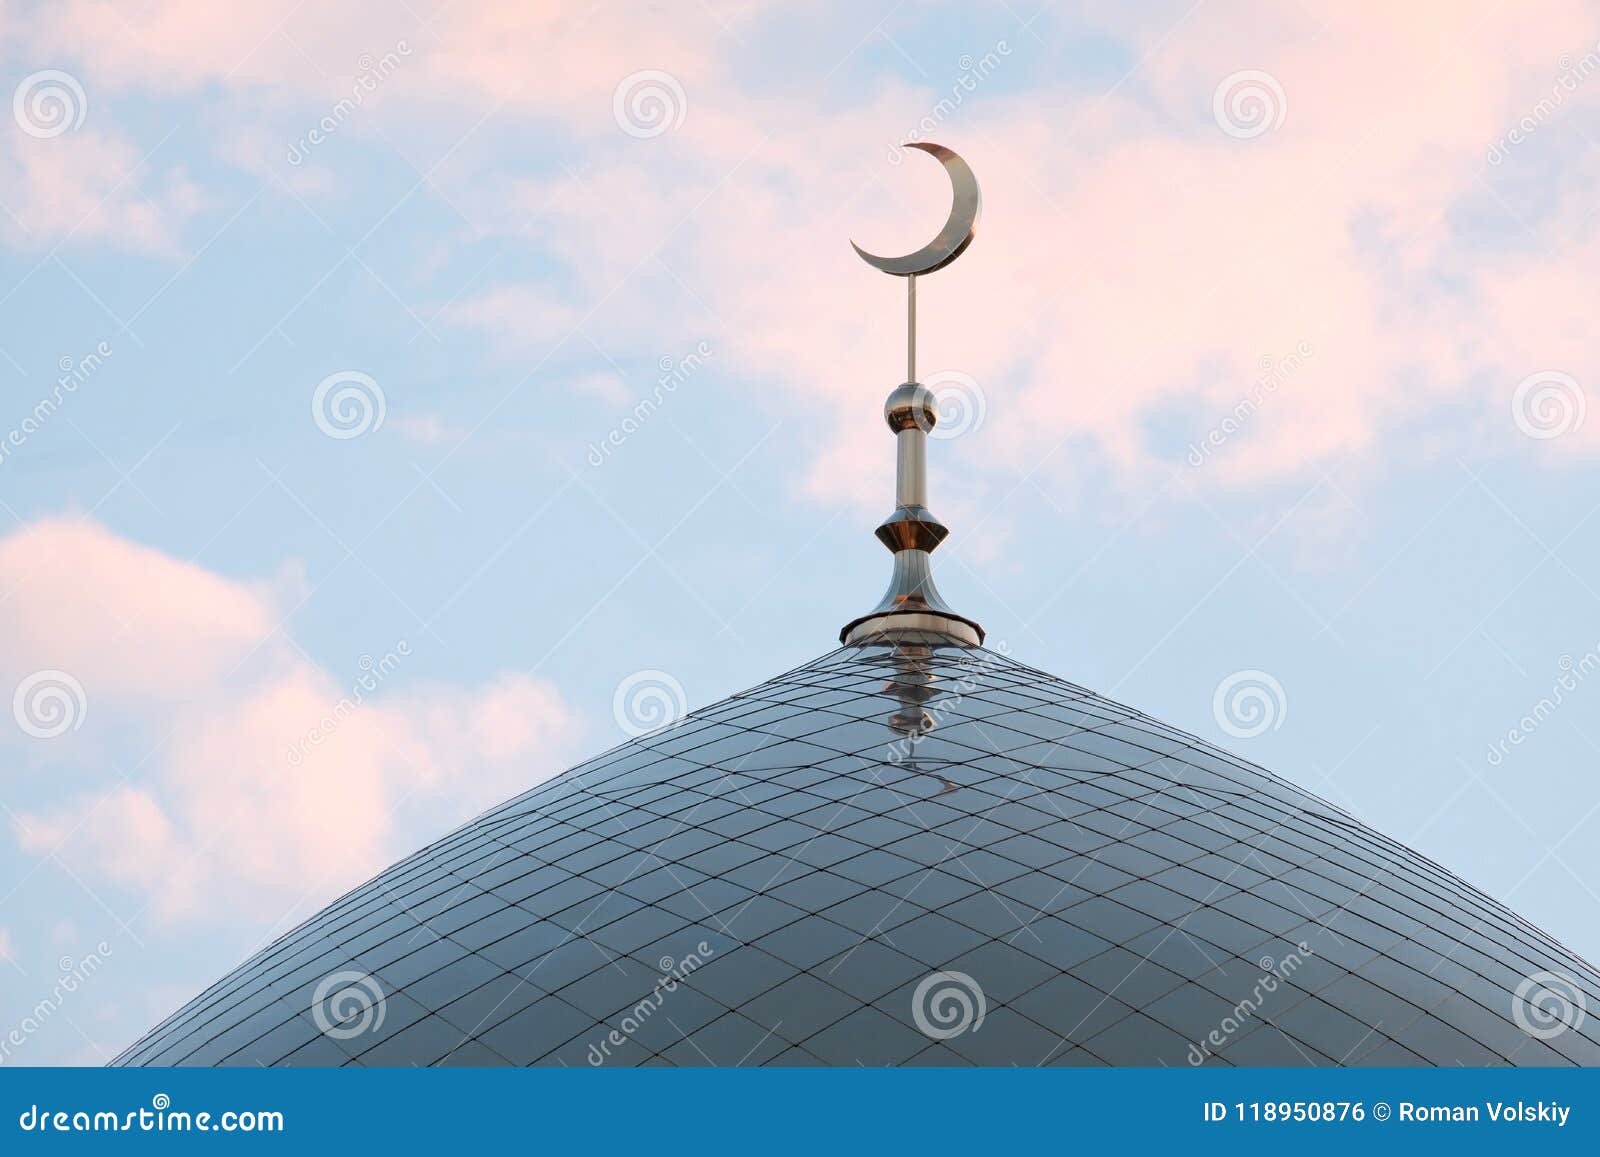 Fedt Tilintetgøre absorberende The Symbol of Islam is a Golden Crescent Moon on Top of the Mosque Minaret.  Blue Evening or Morning Sky with Clouds. Stock Photo - Image of built,  background: 118950876